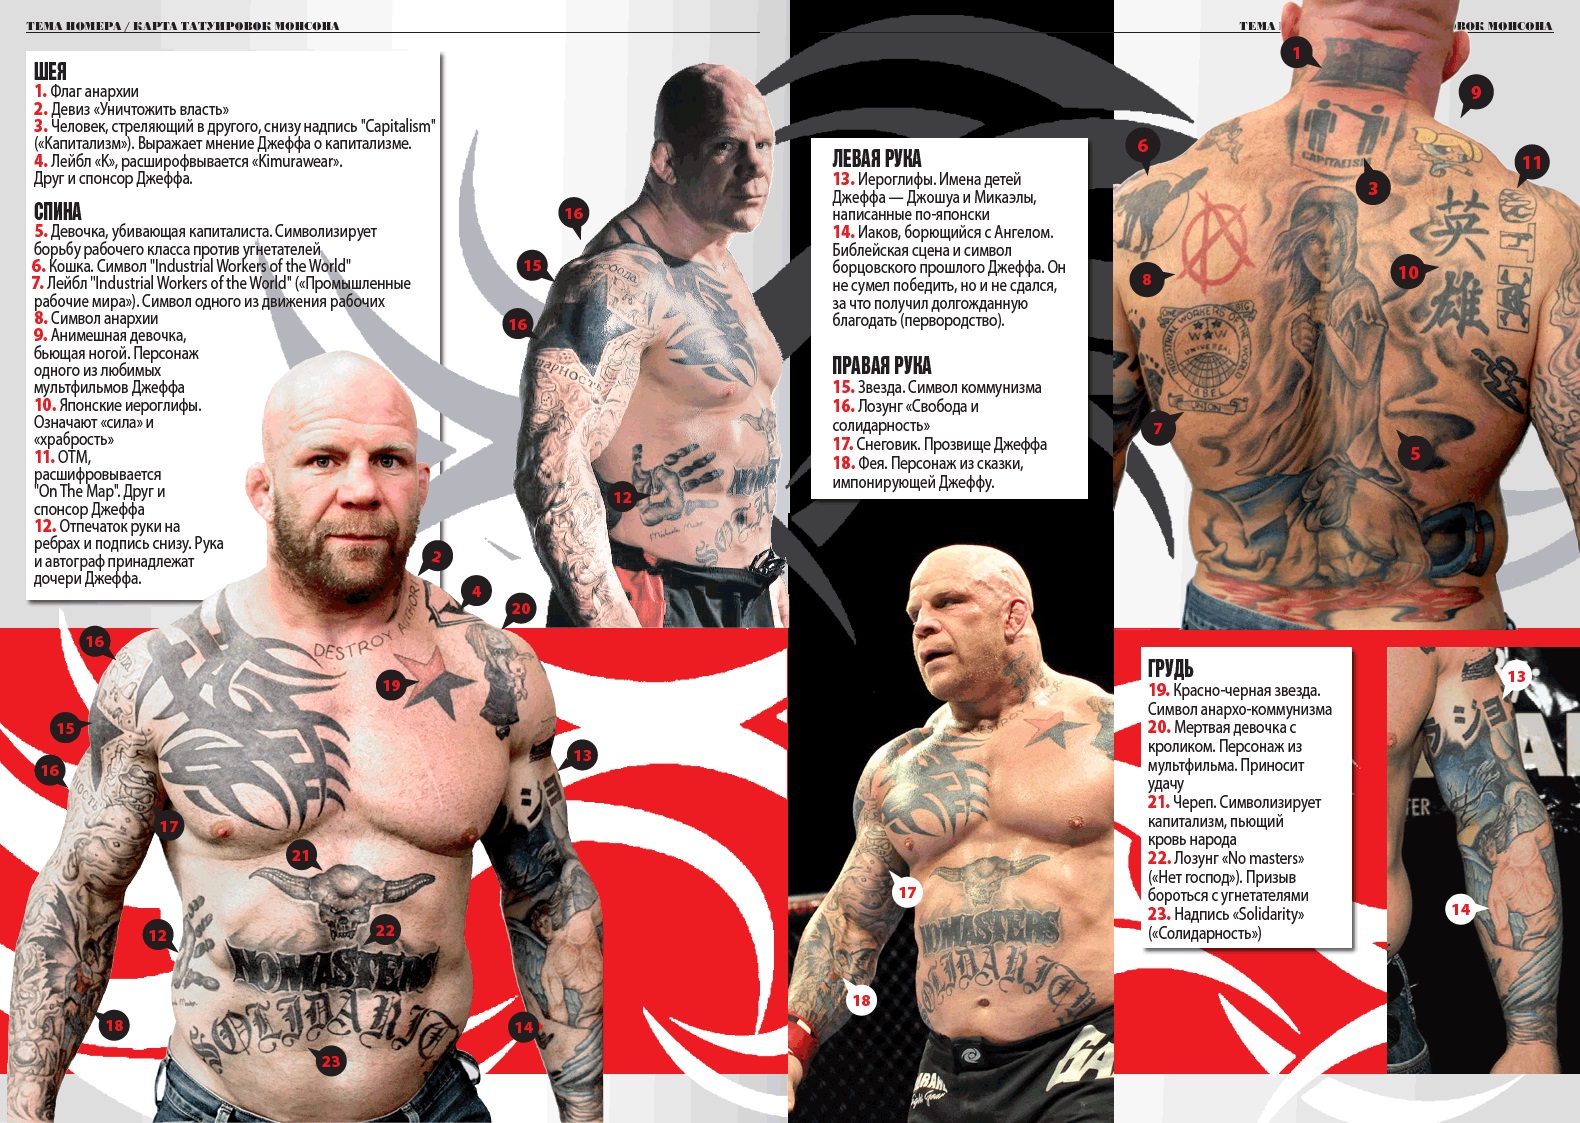 Jeff Monson talks about his tattoos while getting a tattoo  MiddleEasy